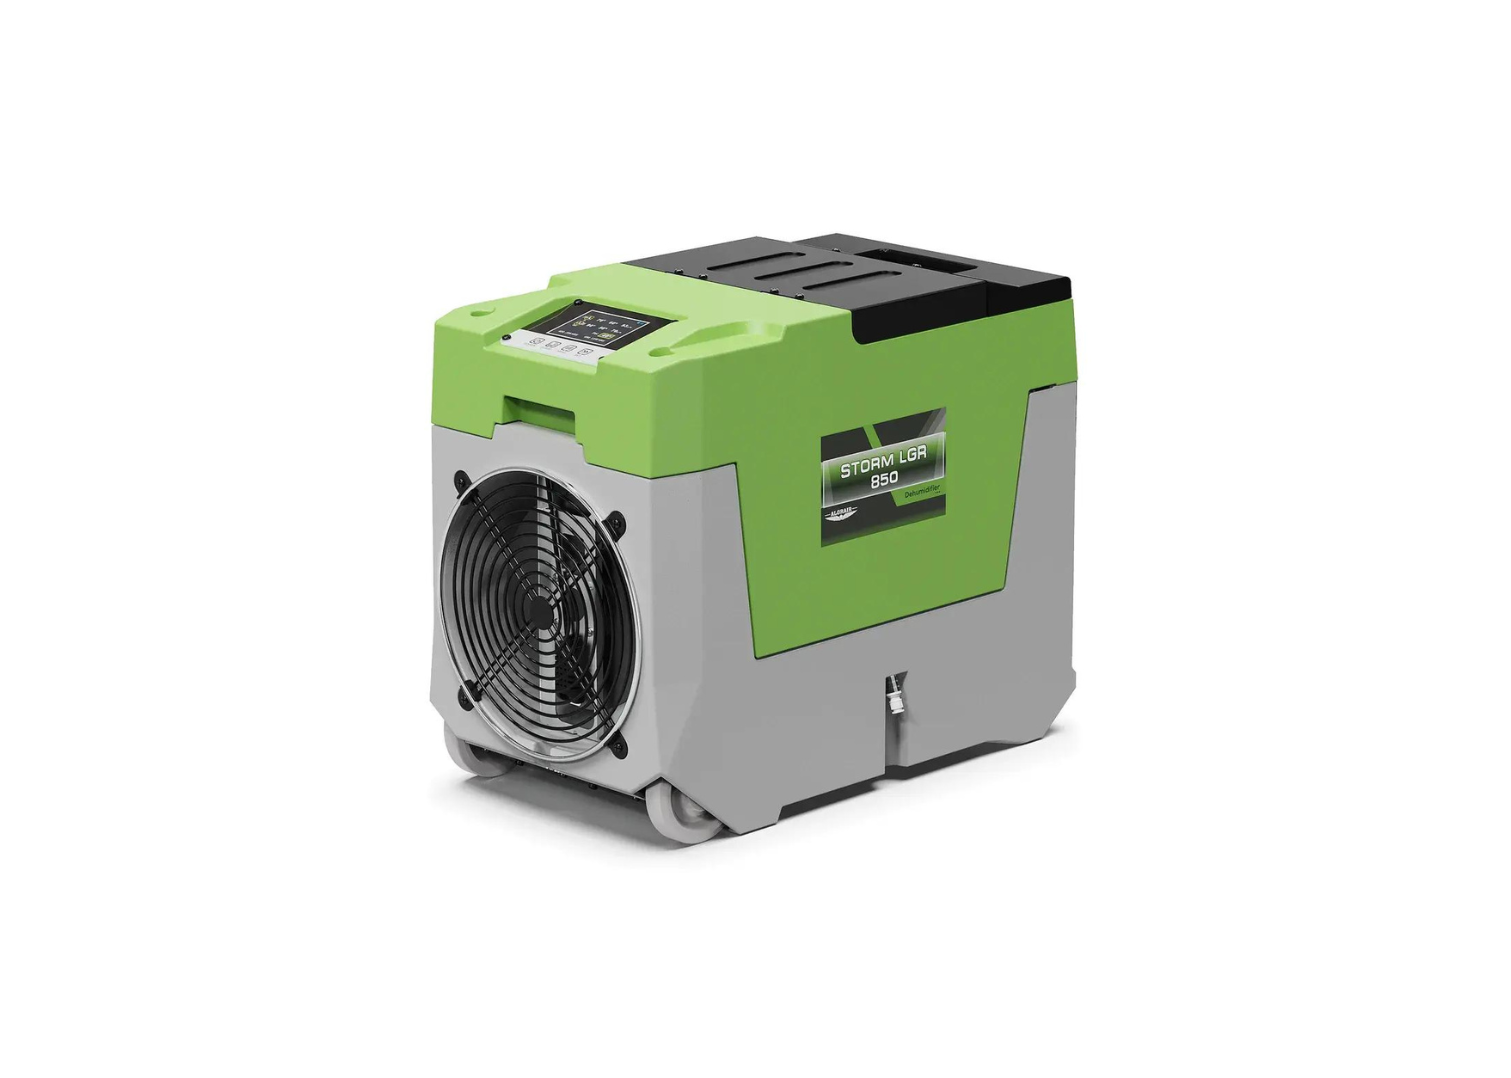 Alorair LGR 850 Industrial/Commercial Dehumidifier With Pump Covers Up To 2300 Sq. Ft.